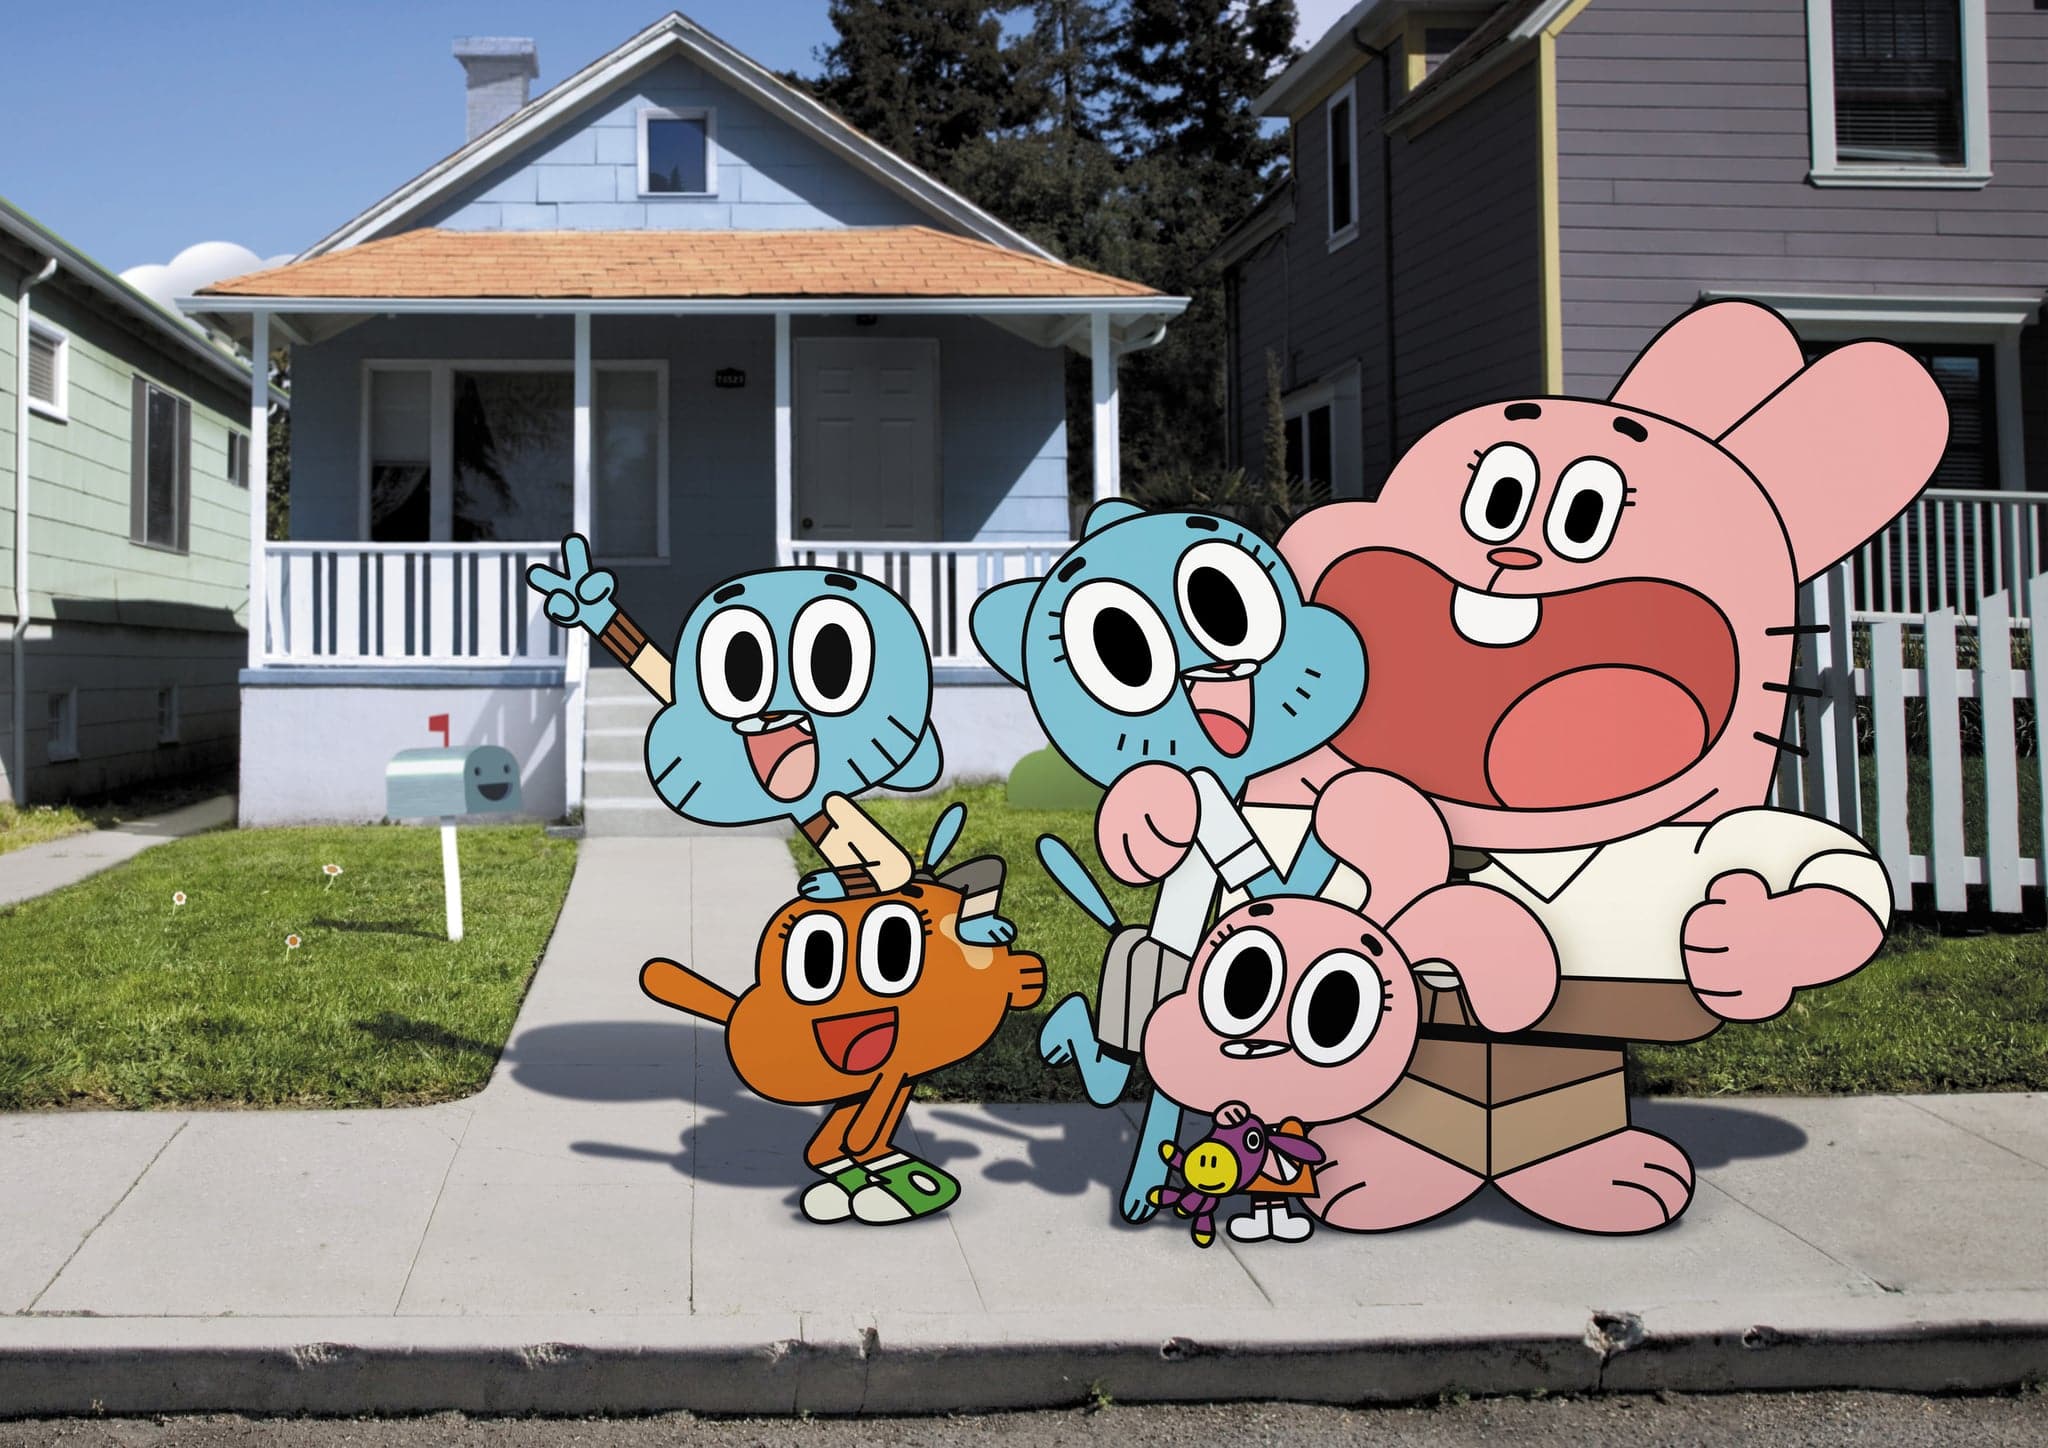 What The What!? The Amazing World Of Gumball New Series And Movie Coming  Soon - LRM